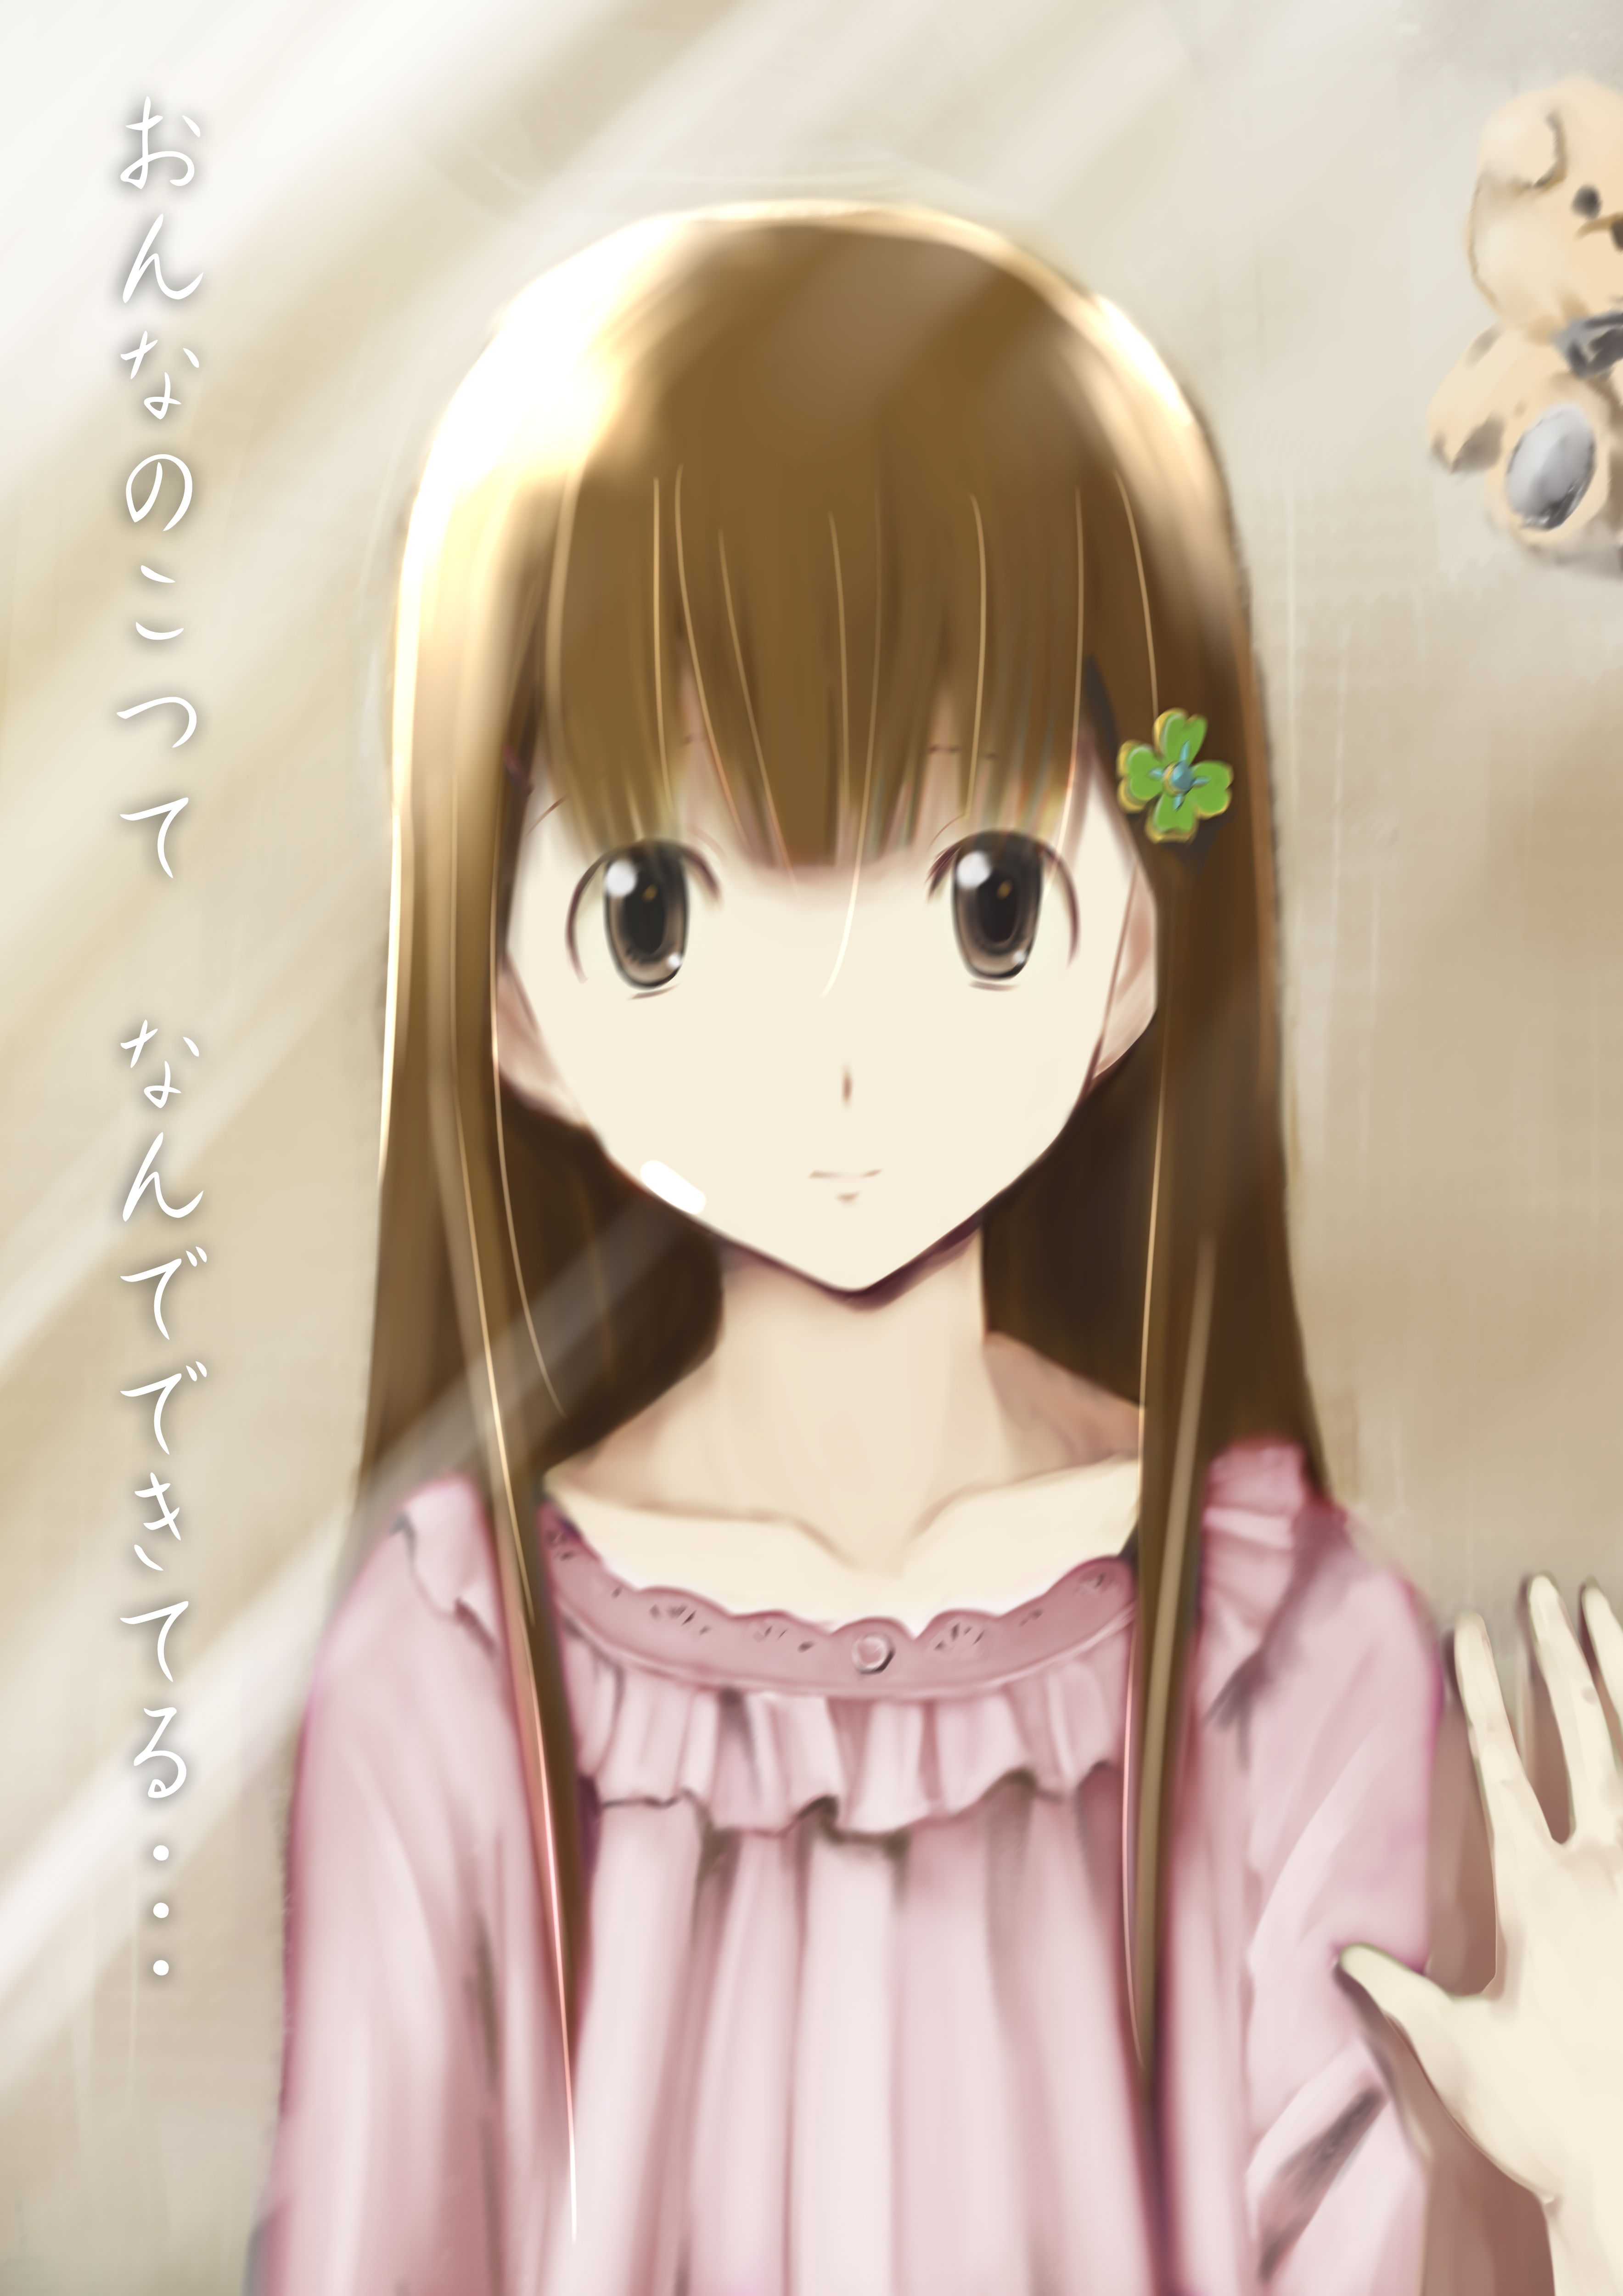 Hourou Musuko Backgrounds, Compatible - PC, Mobile, Gadgets| 3535x5000 px